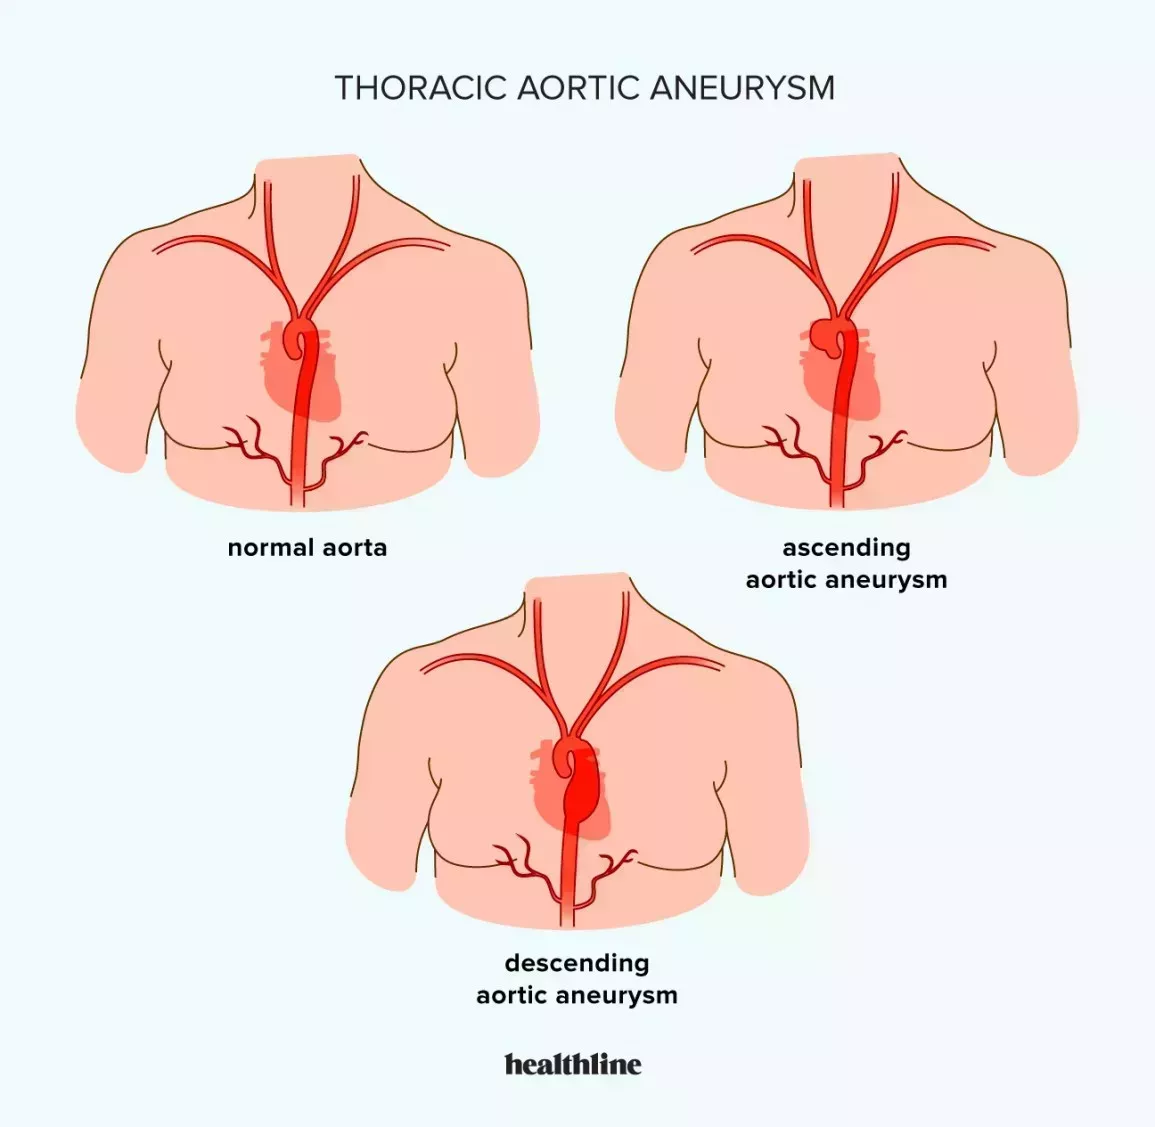 an illustration of a normal aorta compared with an aorta with an ascending thoracic aneurysm and a descending thoracic aortic aneurysm 